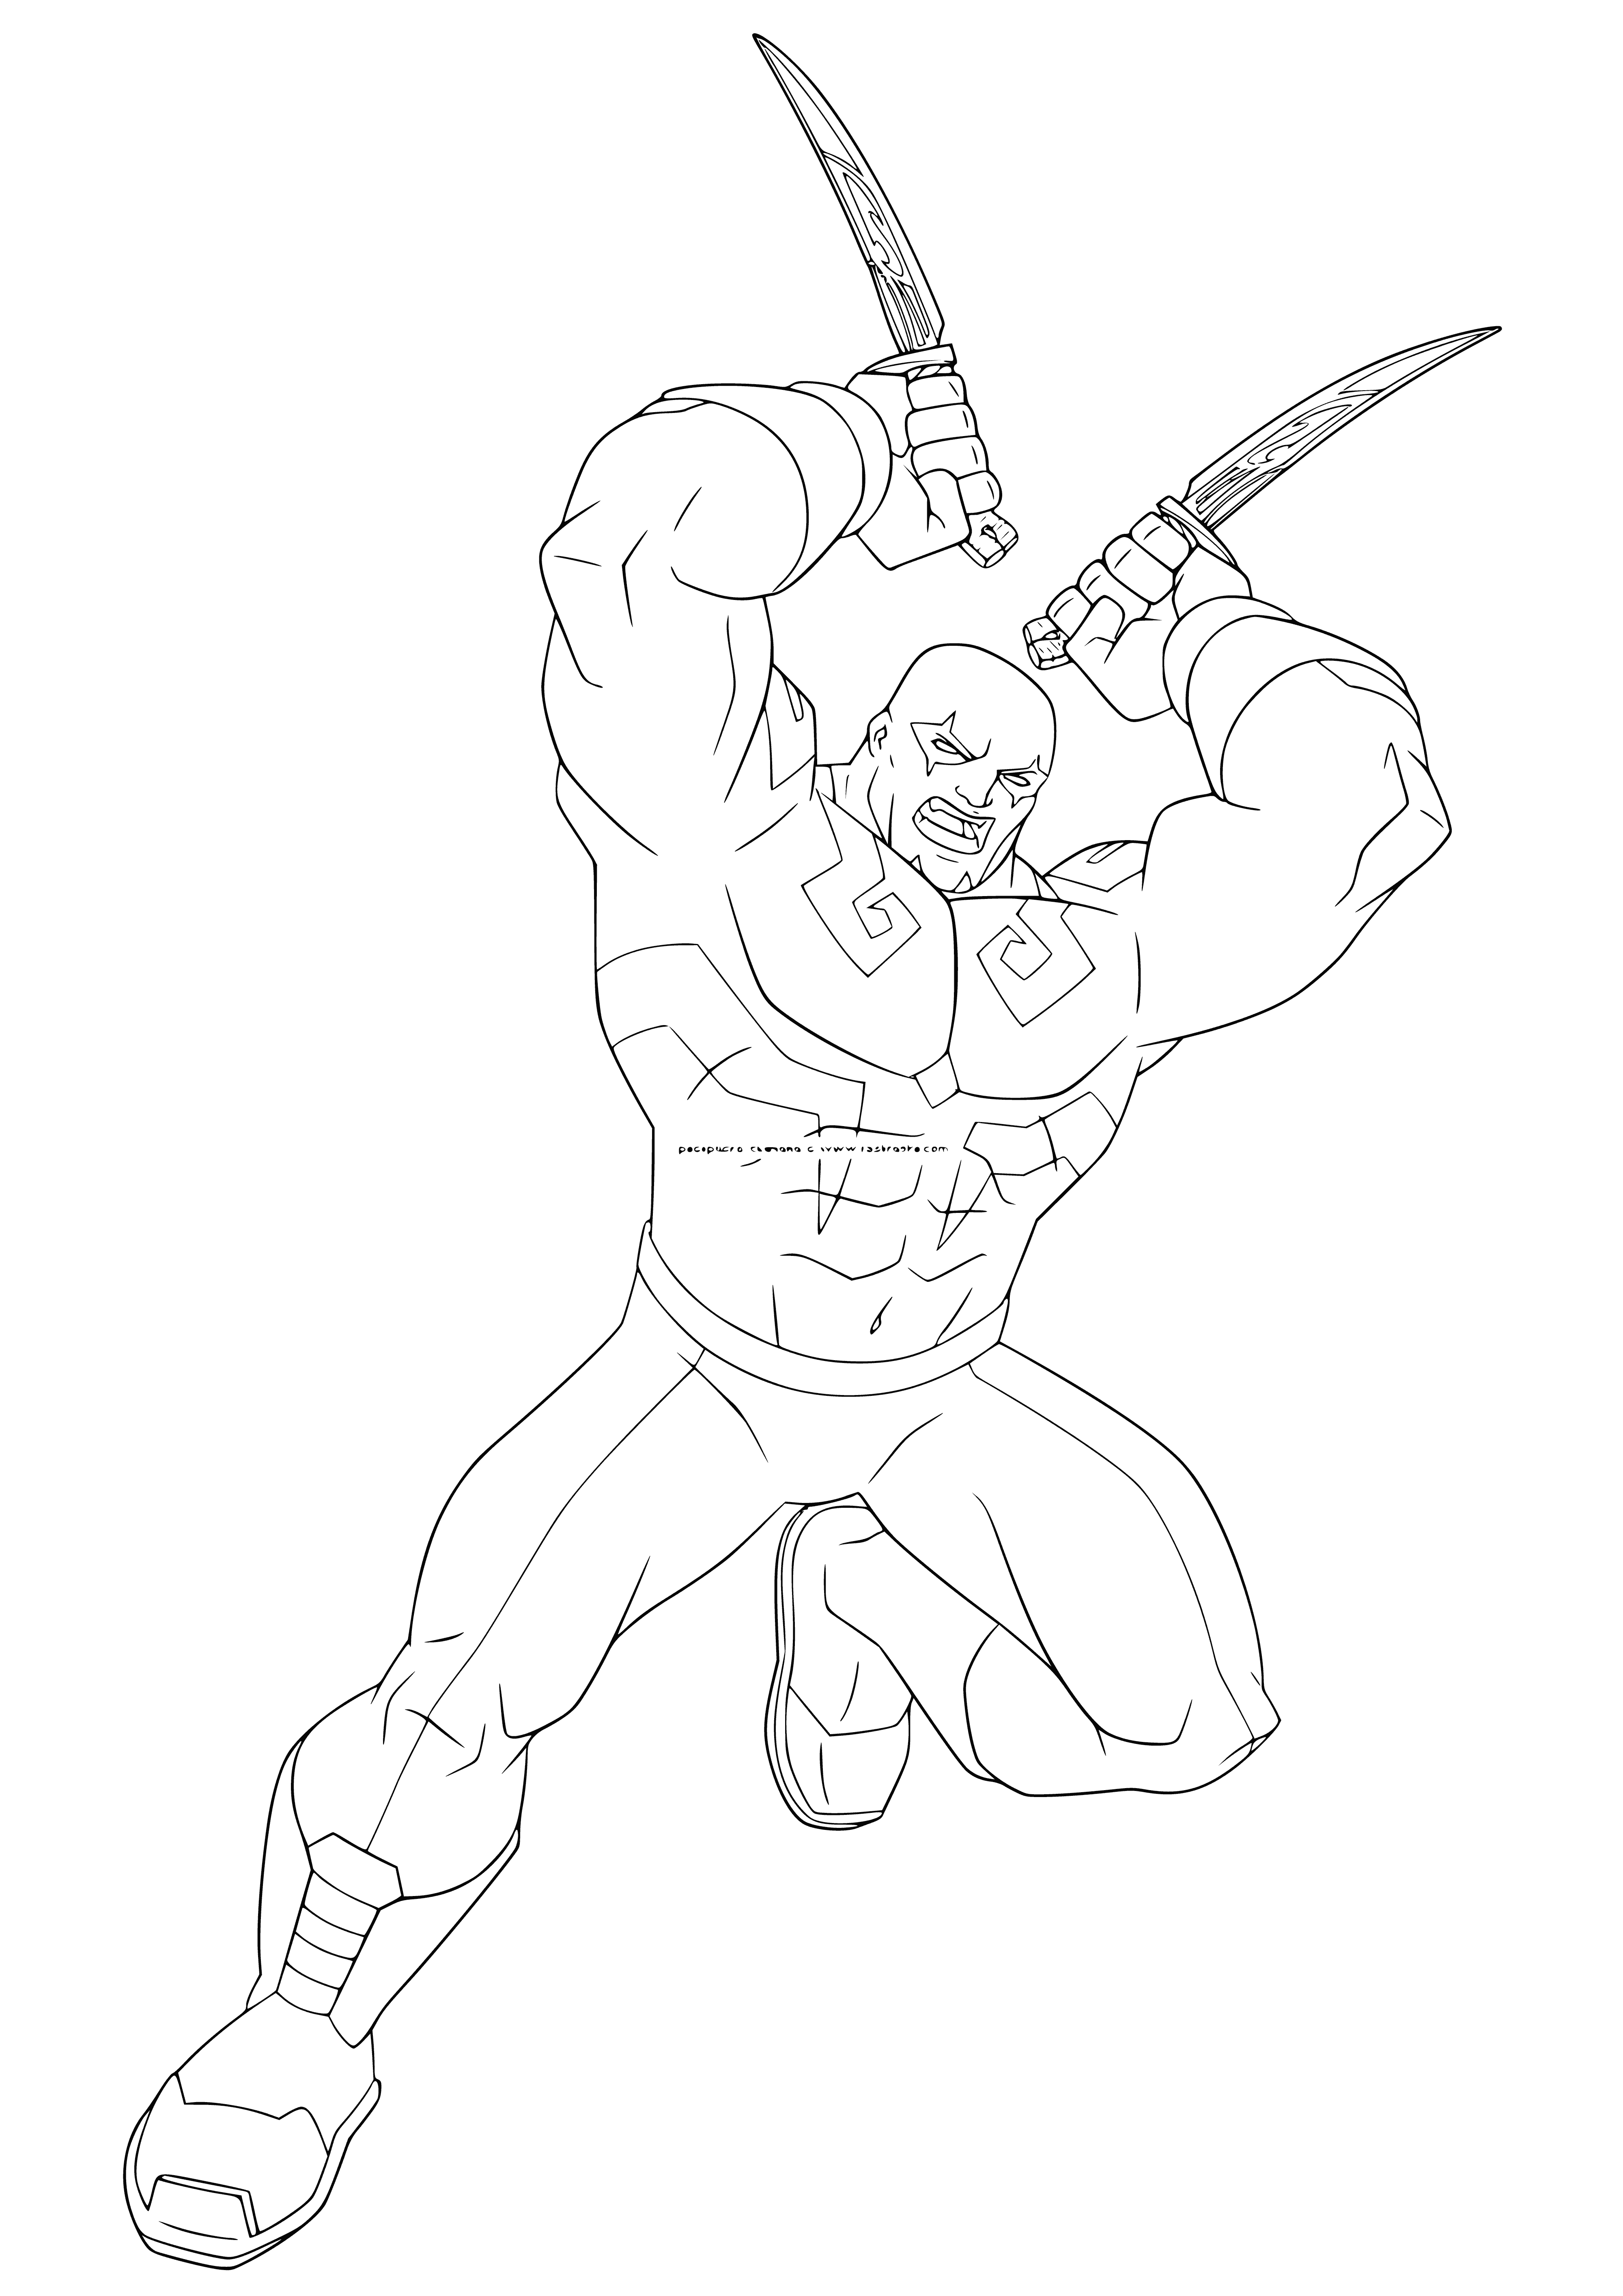 Drax the Destroyer coloring page